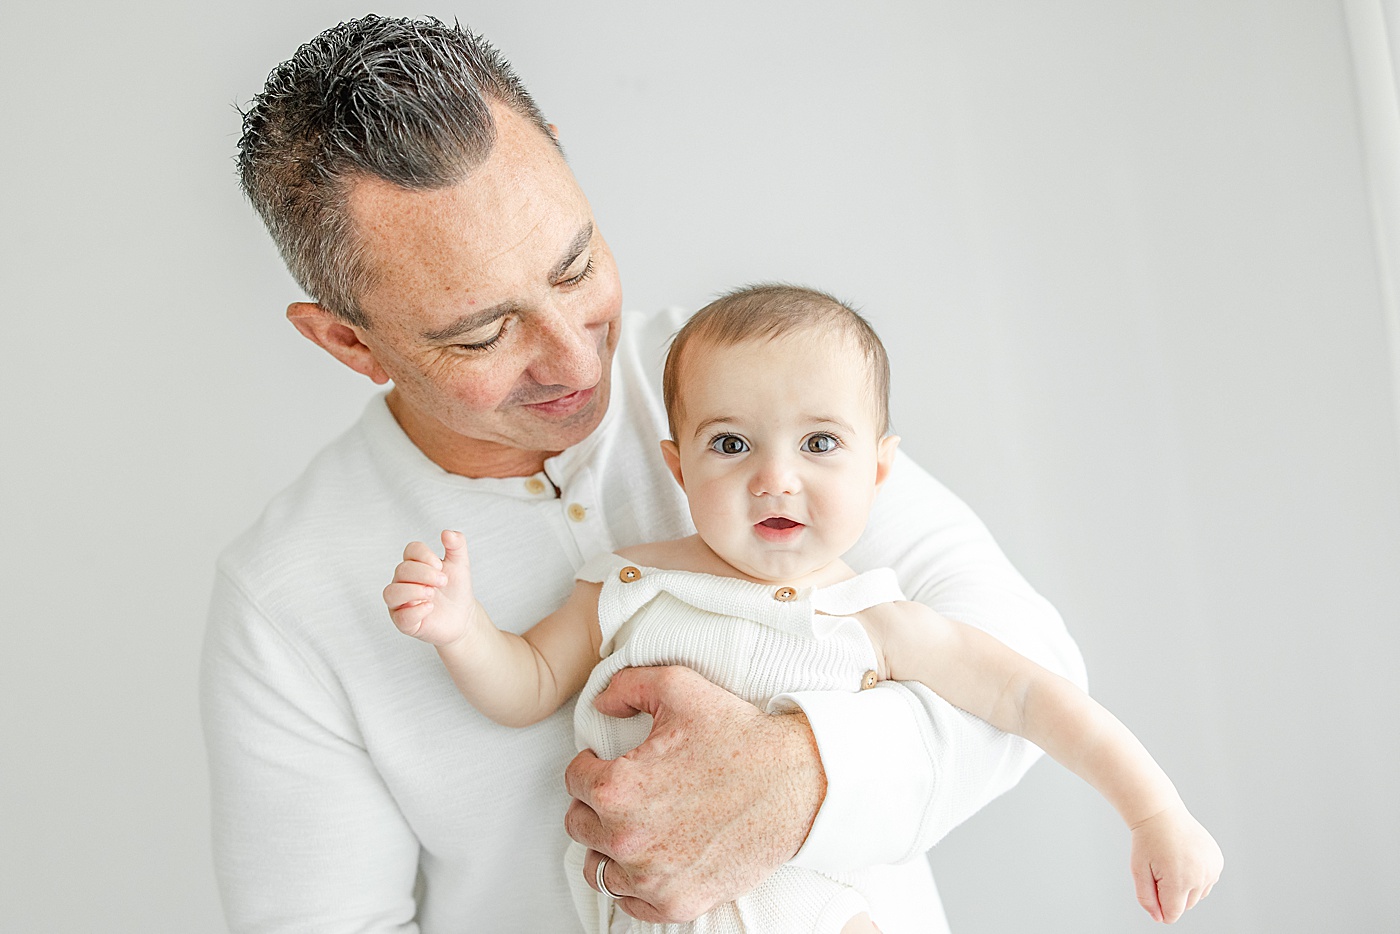 Dad and his 7 month old son during studio photoshoot in Fairfield County, CT | Kristin Wood Photography